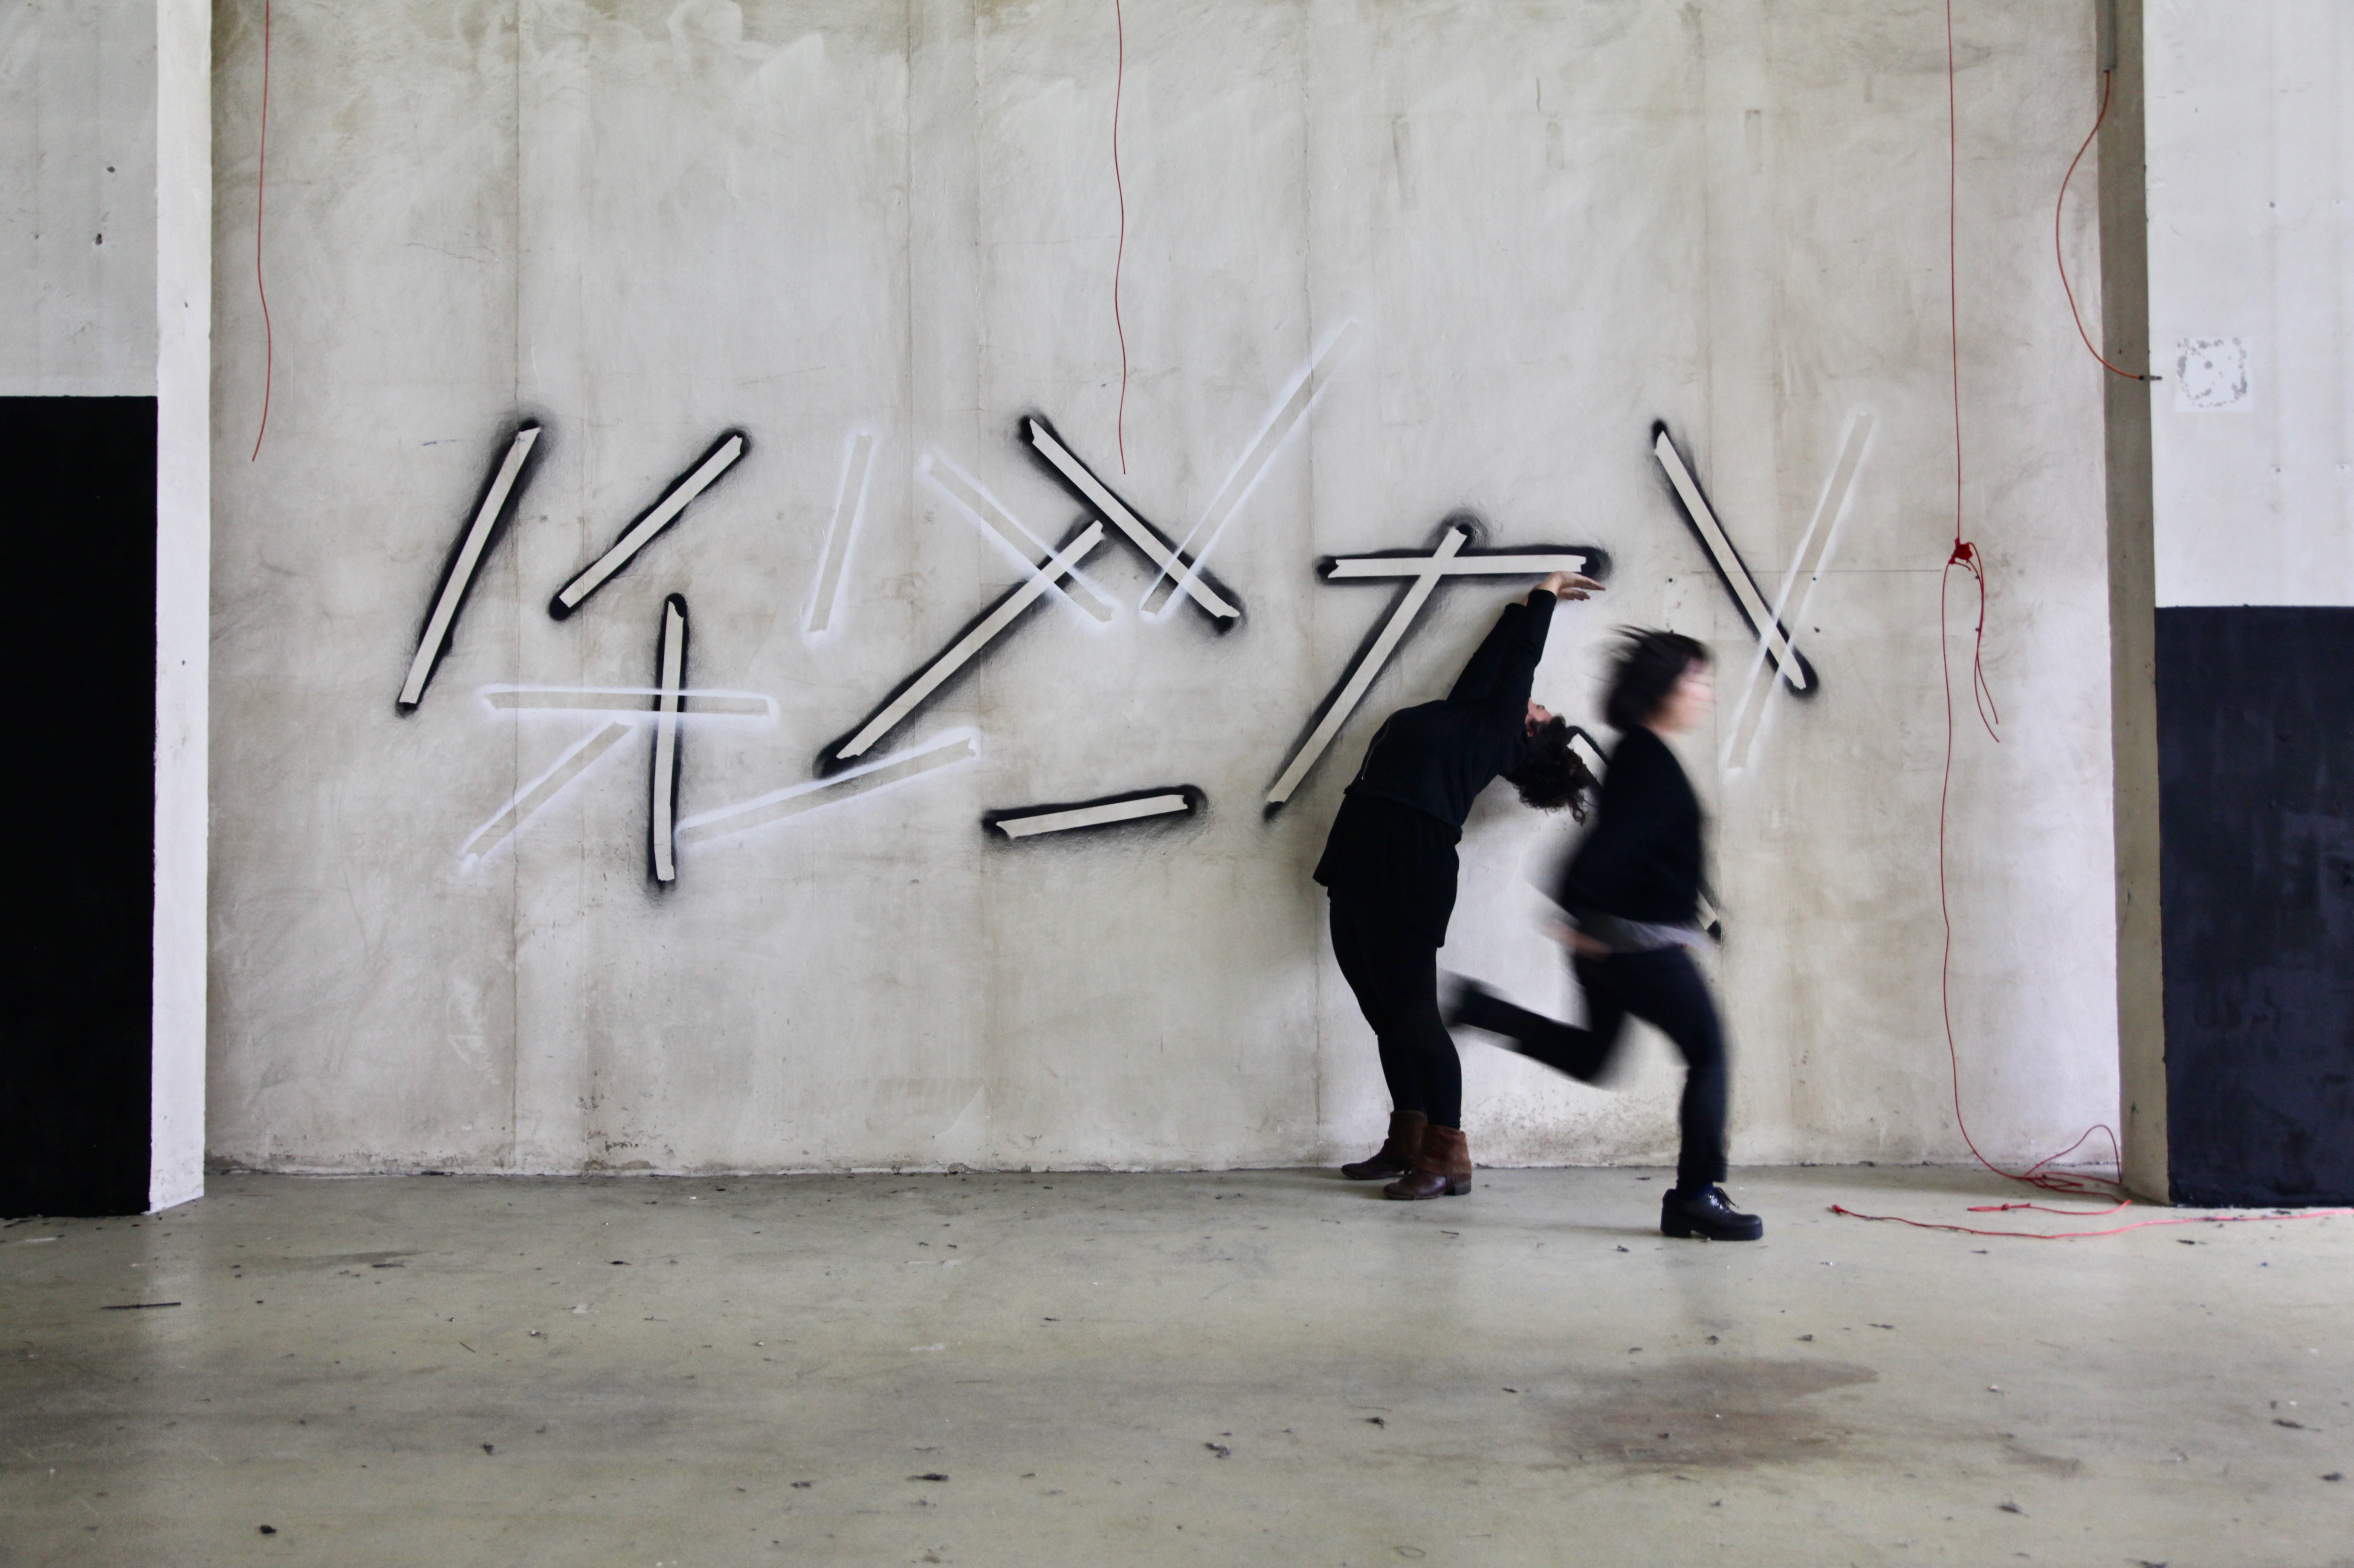 A concrete wall is sprayed with geometric elongated shapes. To the right and left of it stand concrete columns painted black in parts. In front of the wall are two people dressed in black. One is bending backwards. The other runs through the picture and is only blurred photographed.